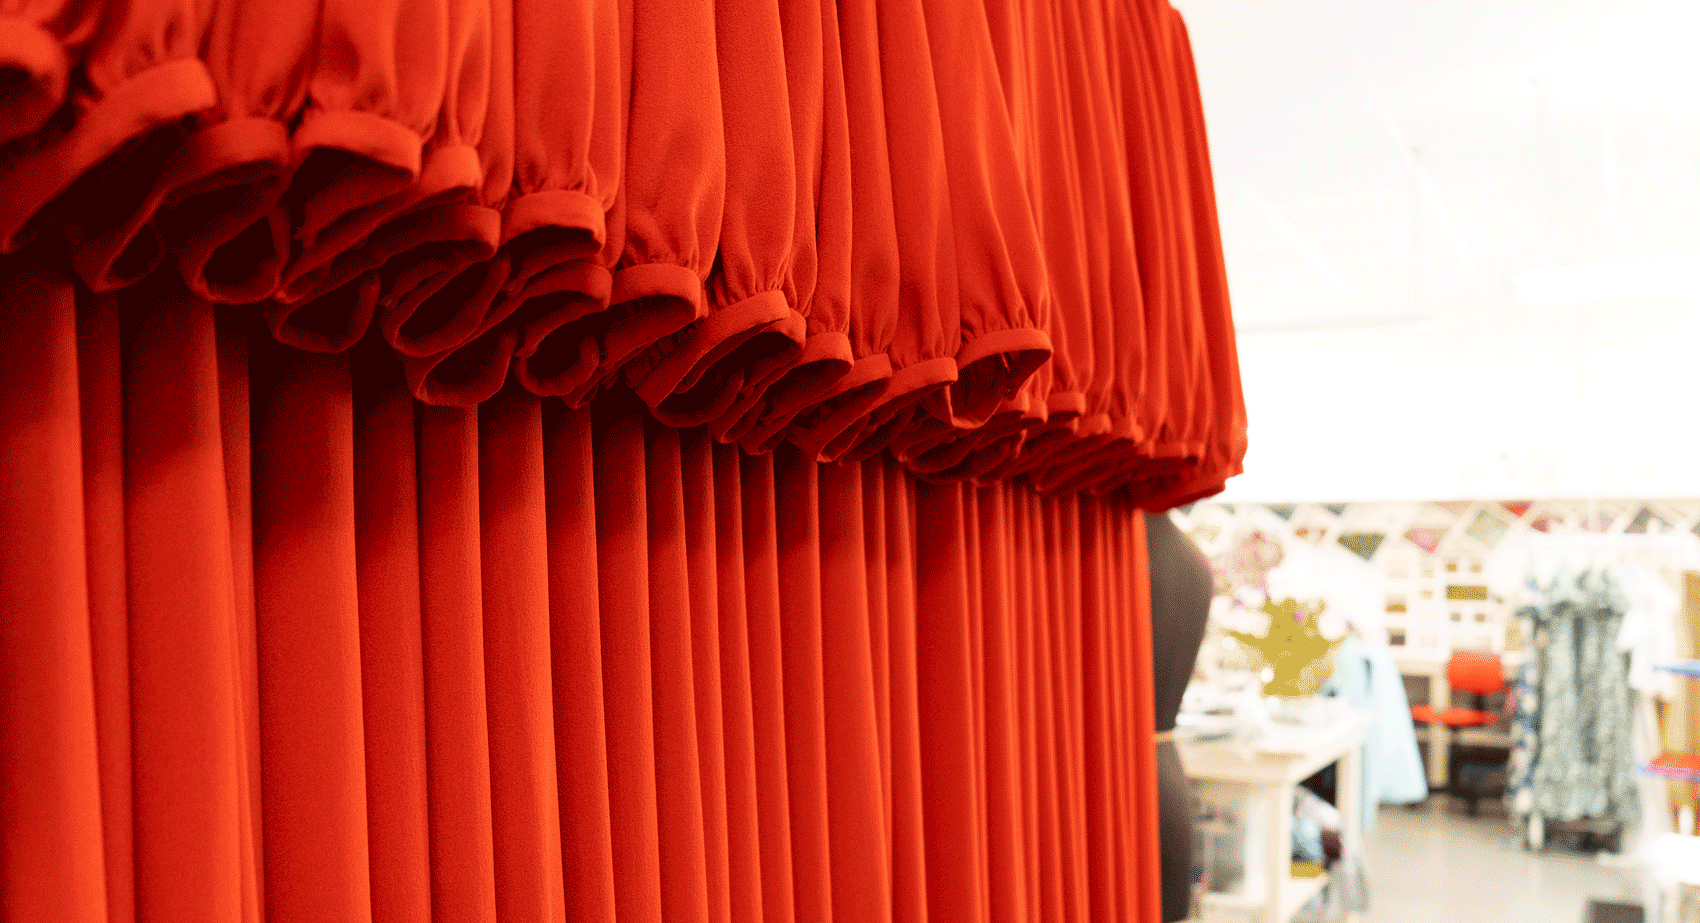 Red Dresses On a Rail